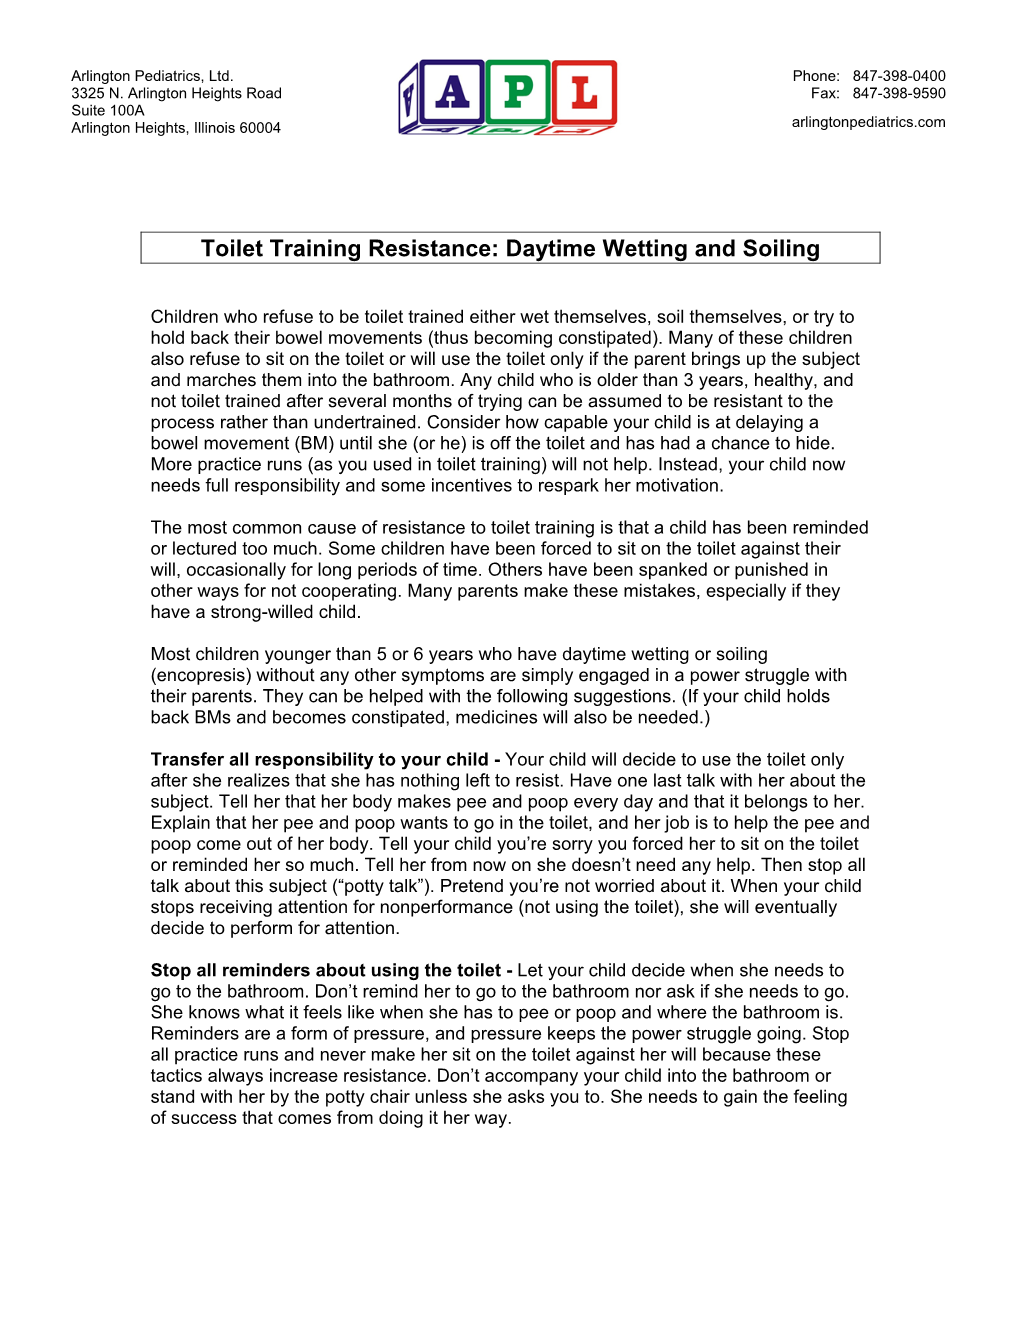 Toilet Training Resistance – Daytime Wetting and Soiling